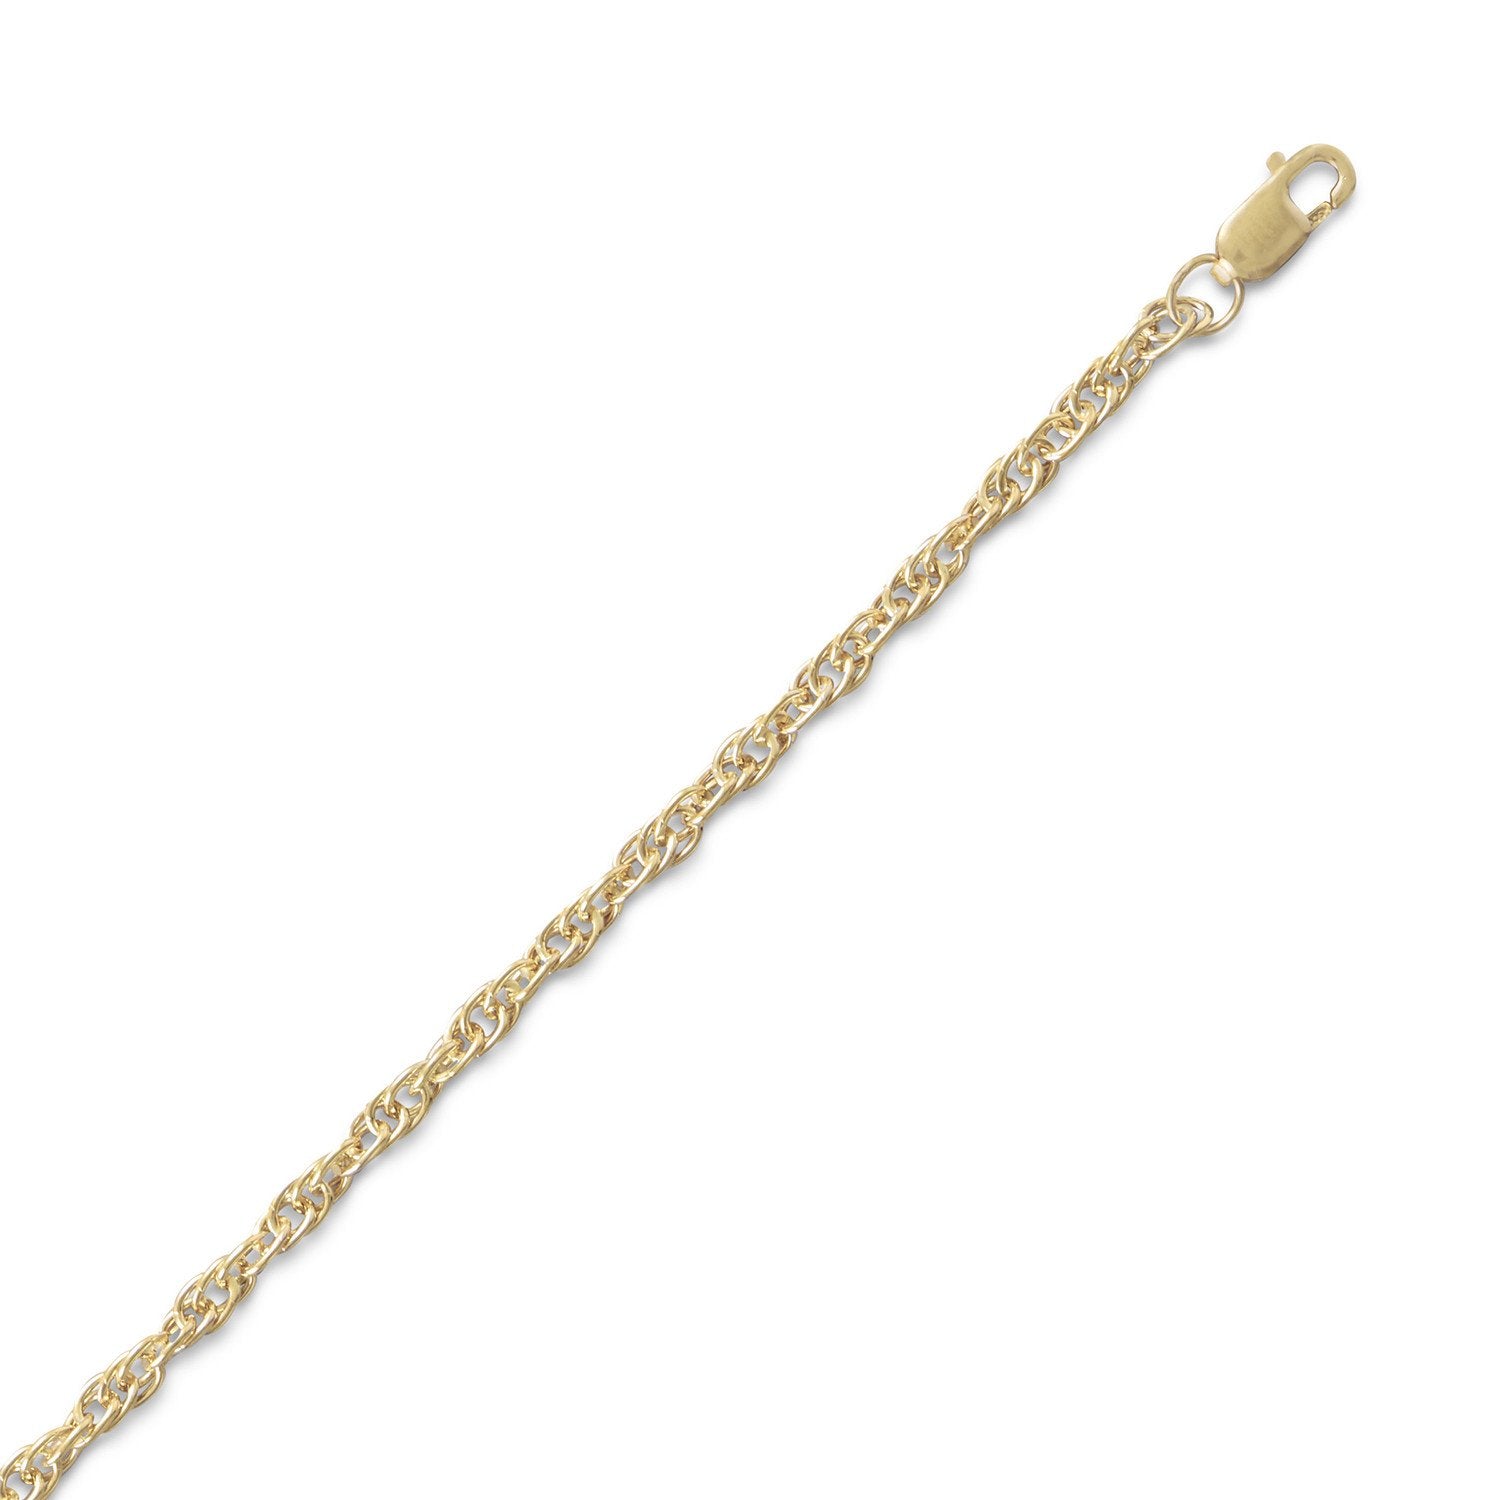 14/20 Gold Filled Rope Chain (2.5mm) - Joyeria Lady